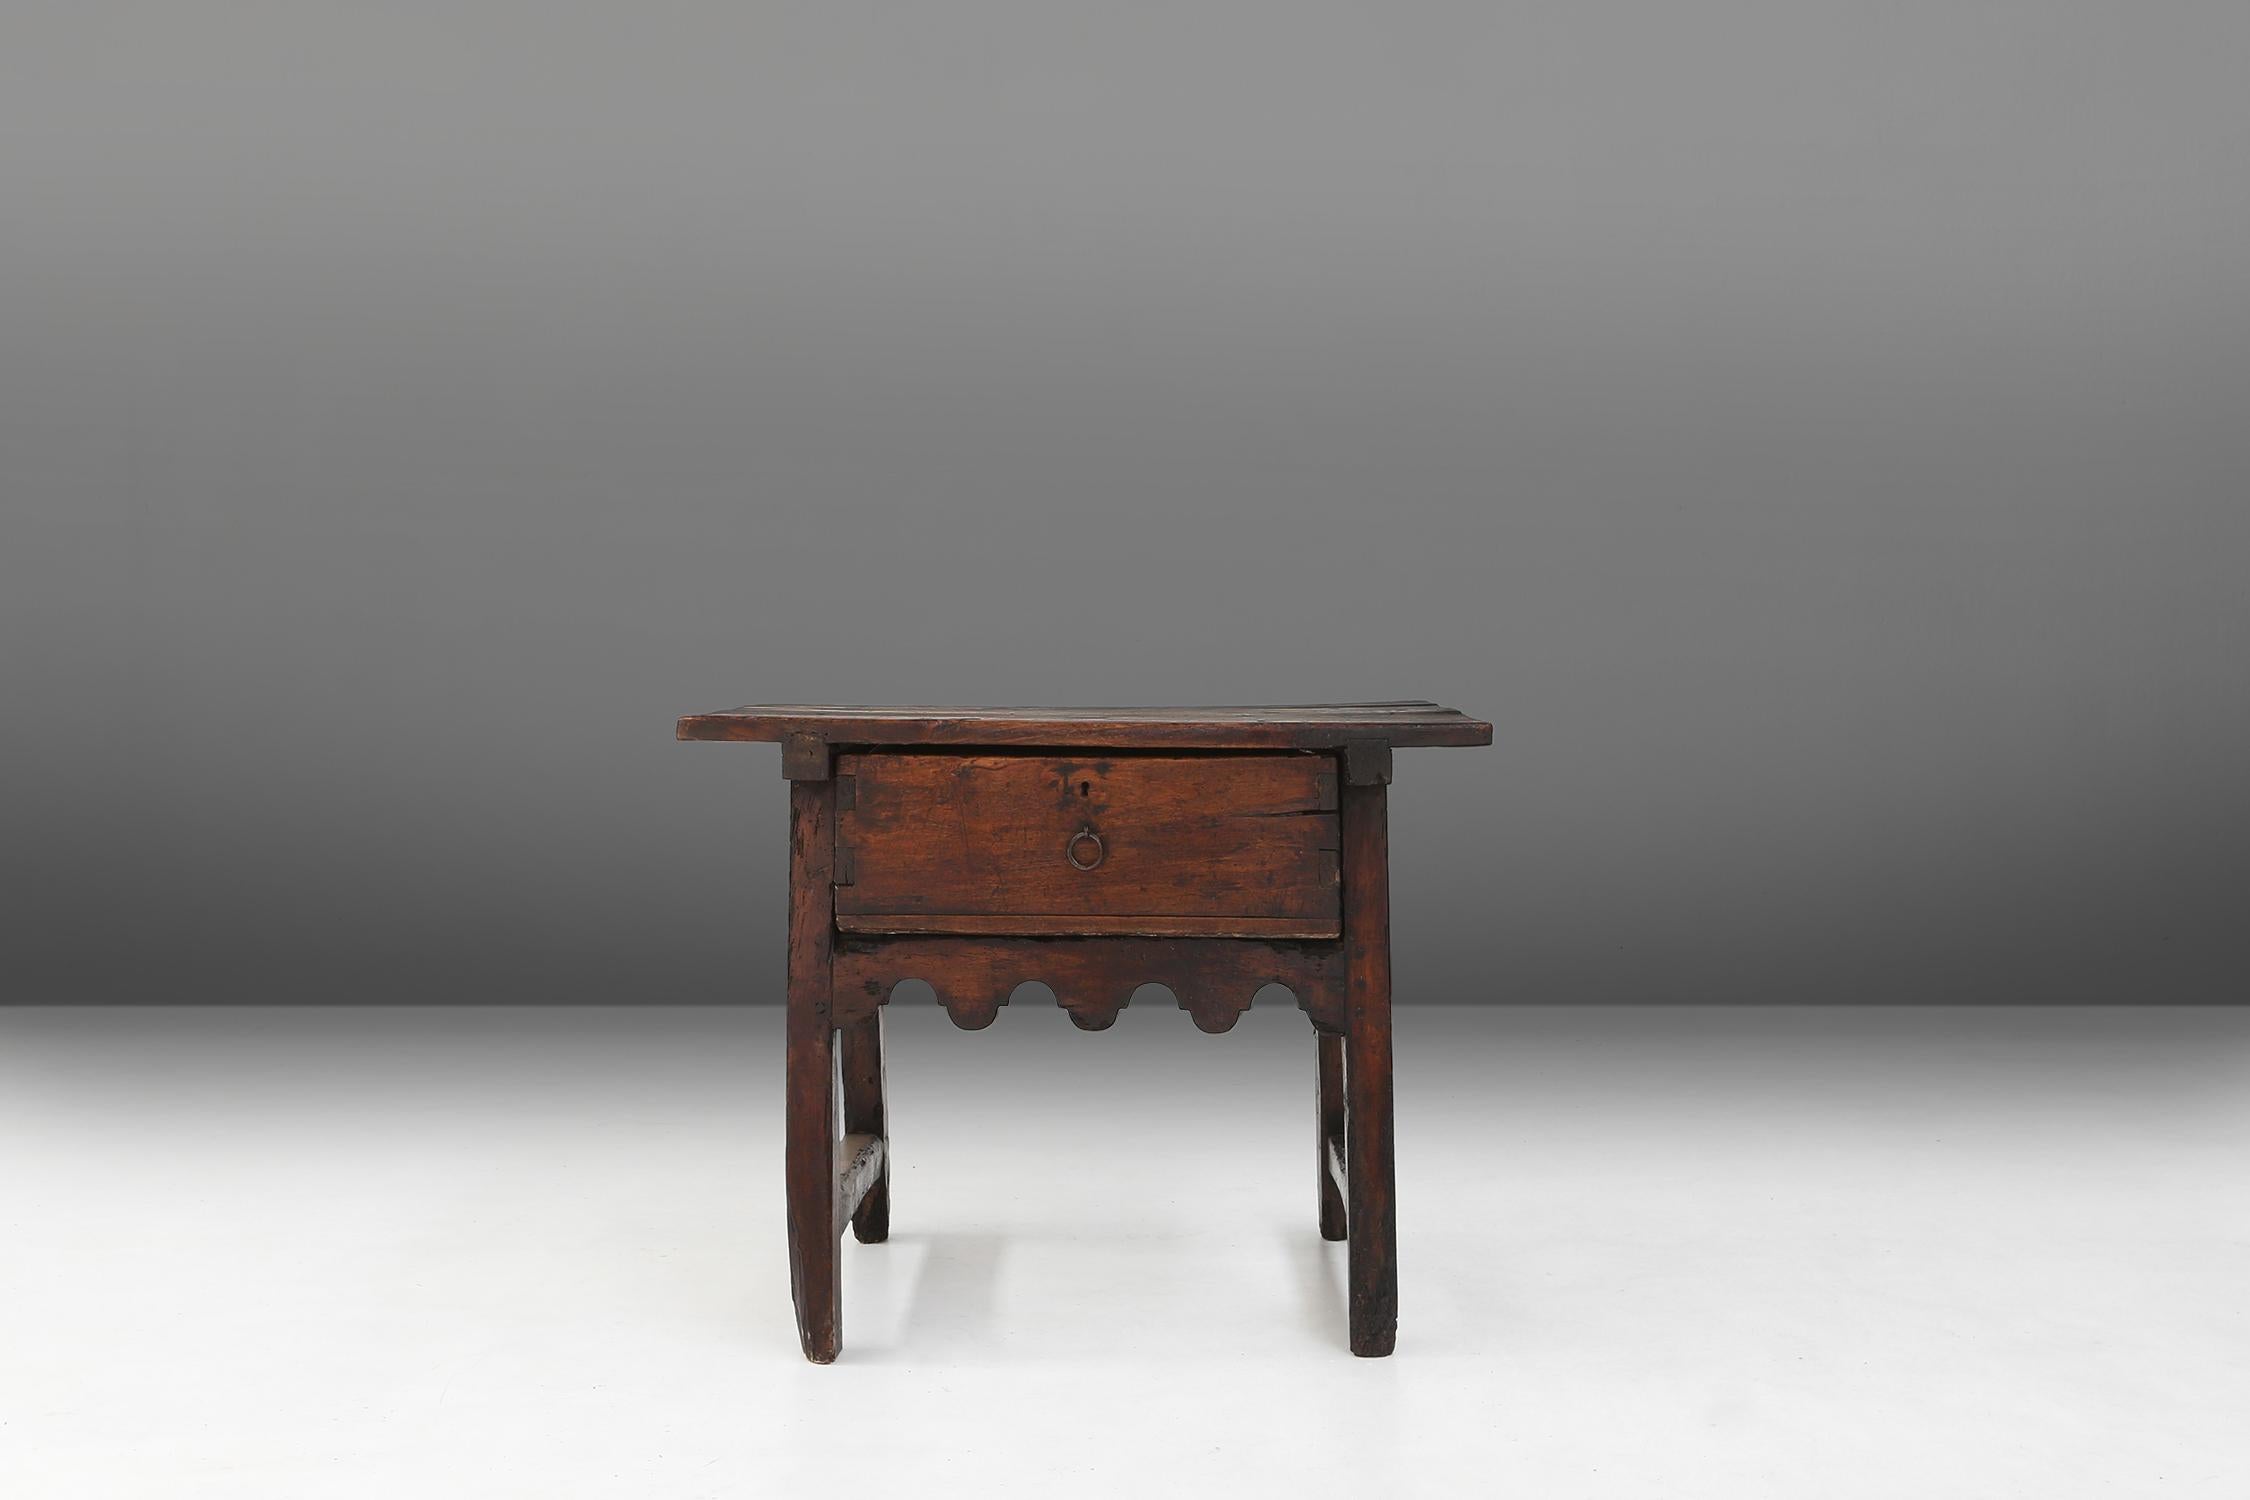 This extraordinary 18th century table used to be a counter table in a Spanish store or market stall. You can still see the notch in the table top where the money fell in. The table has a beautiful patina on the wood, which is a testament to the time